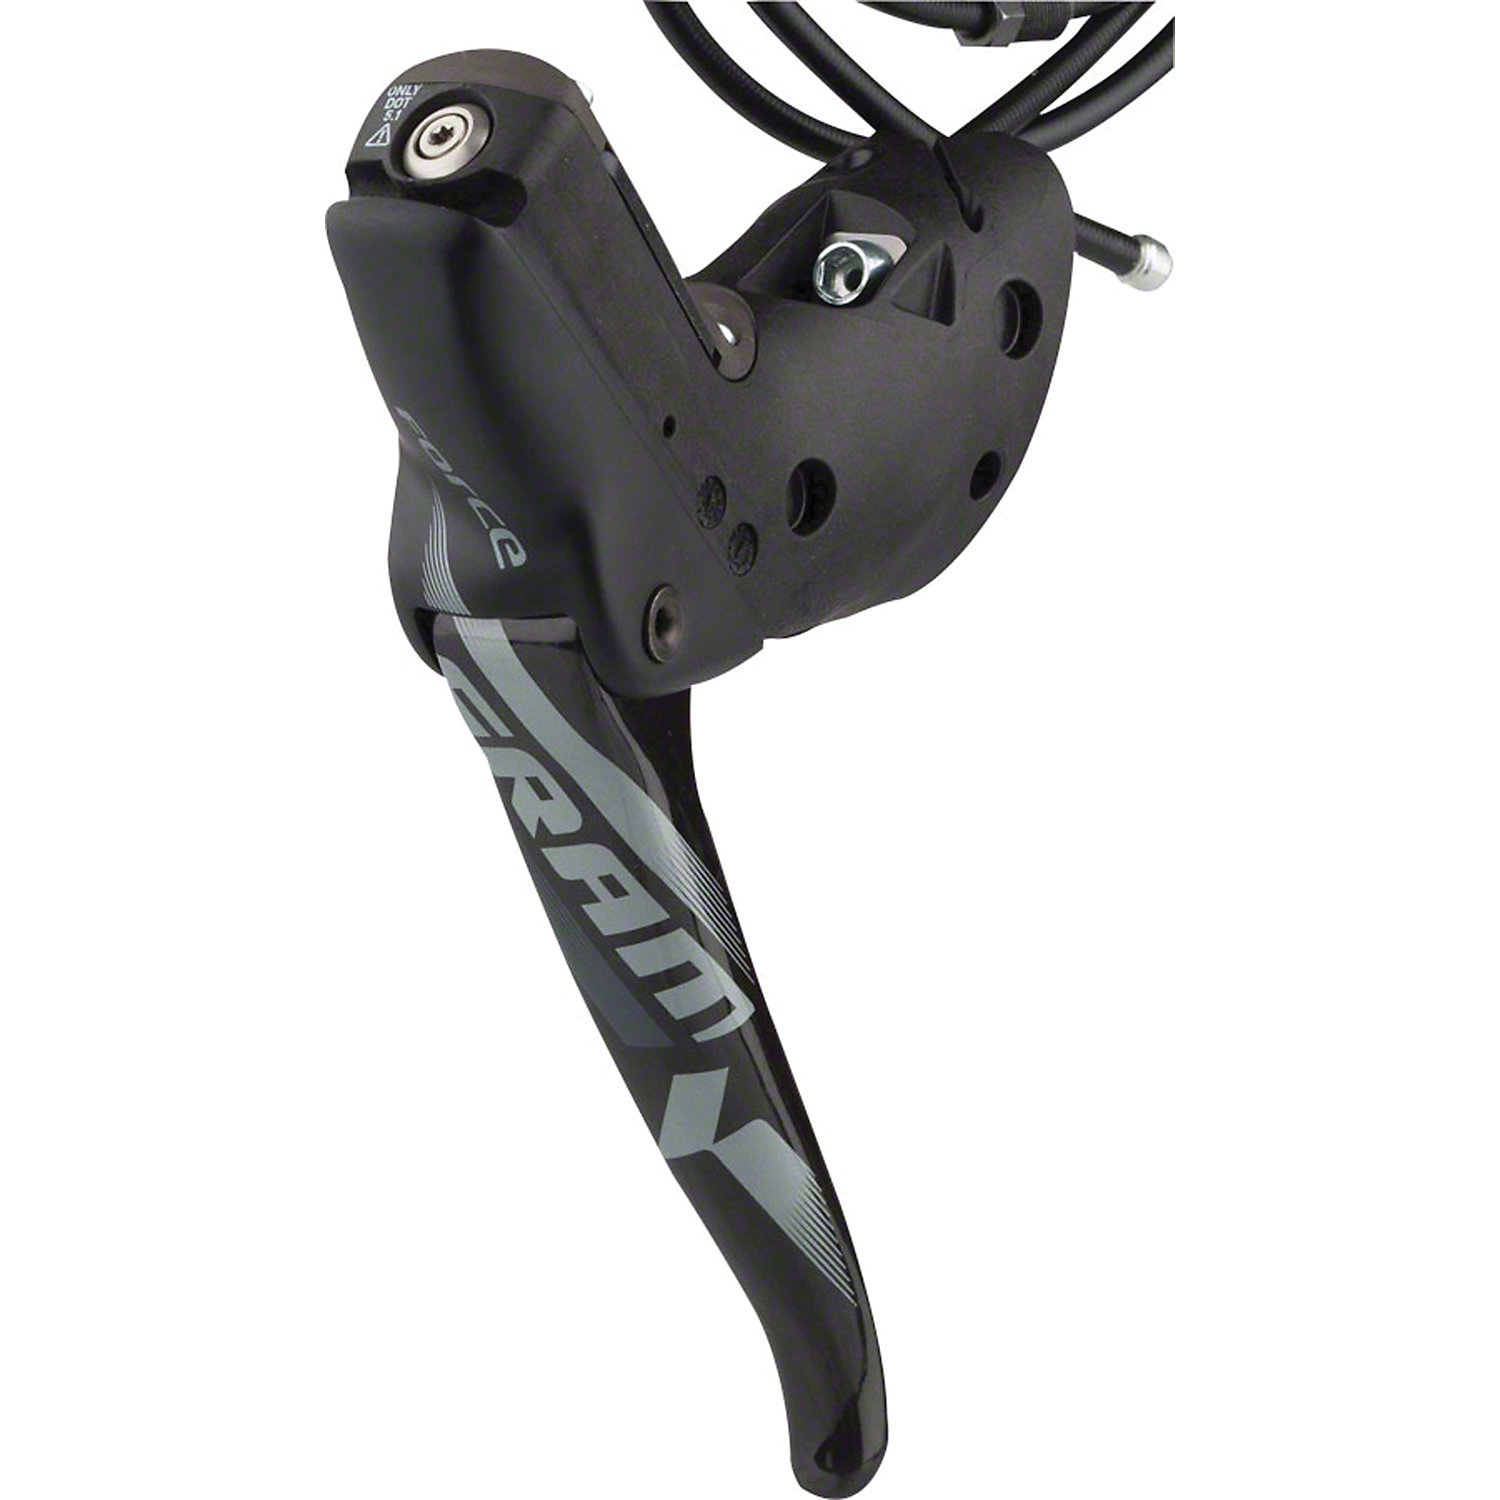 SRAM Force 1 Hydraulic Road Front Brake Lever Complete with 2000mm Hose and Fittings